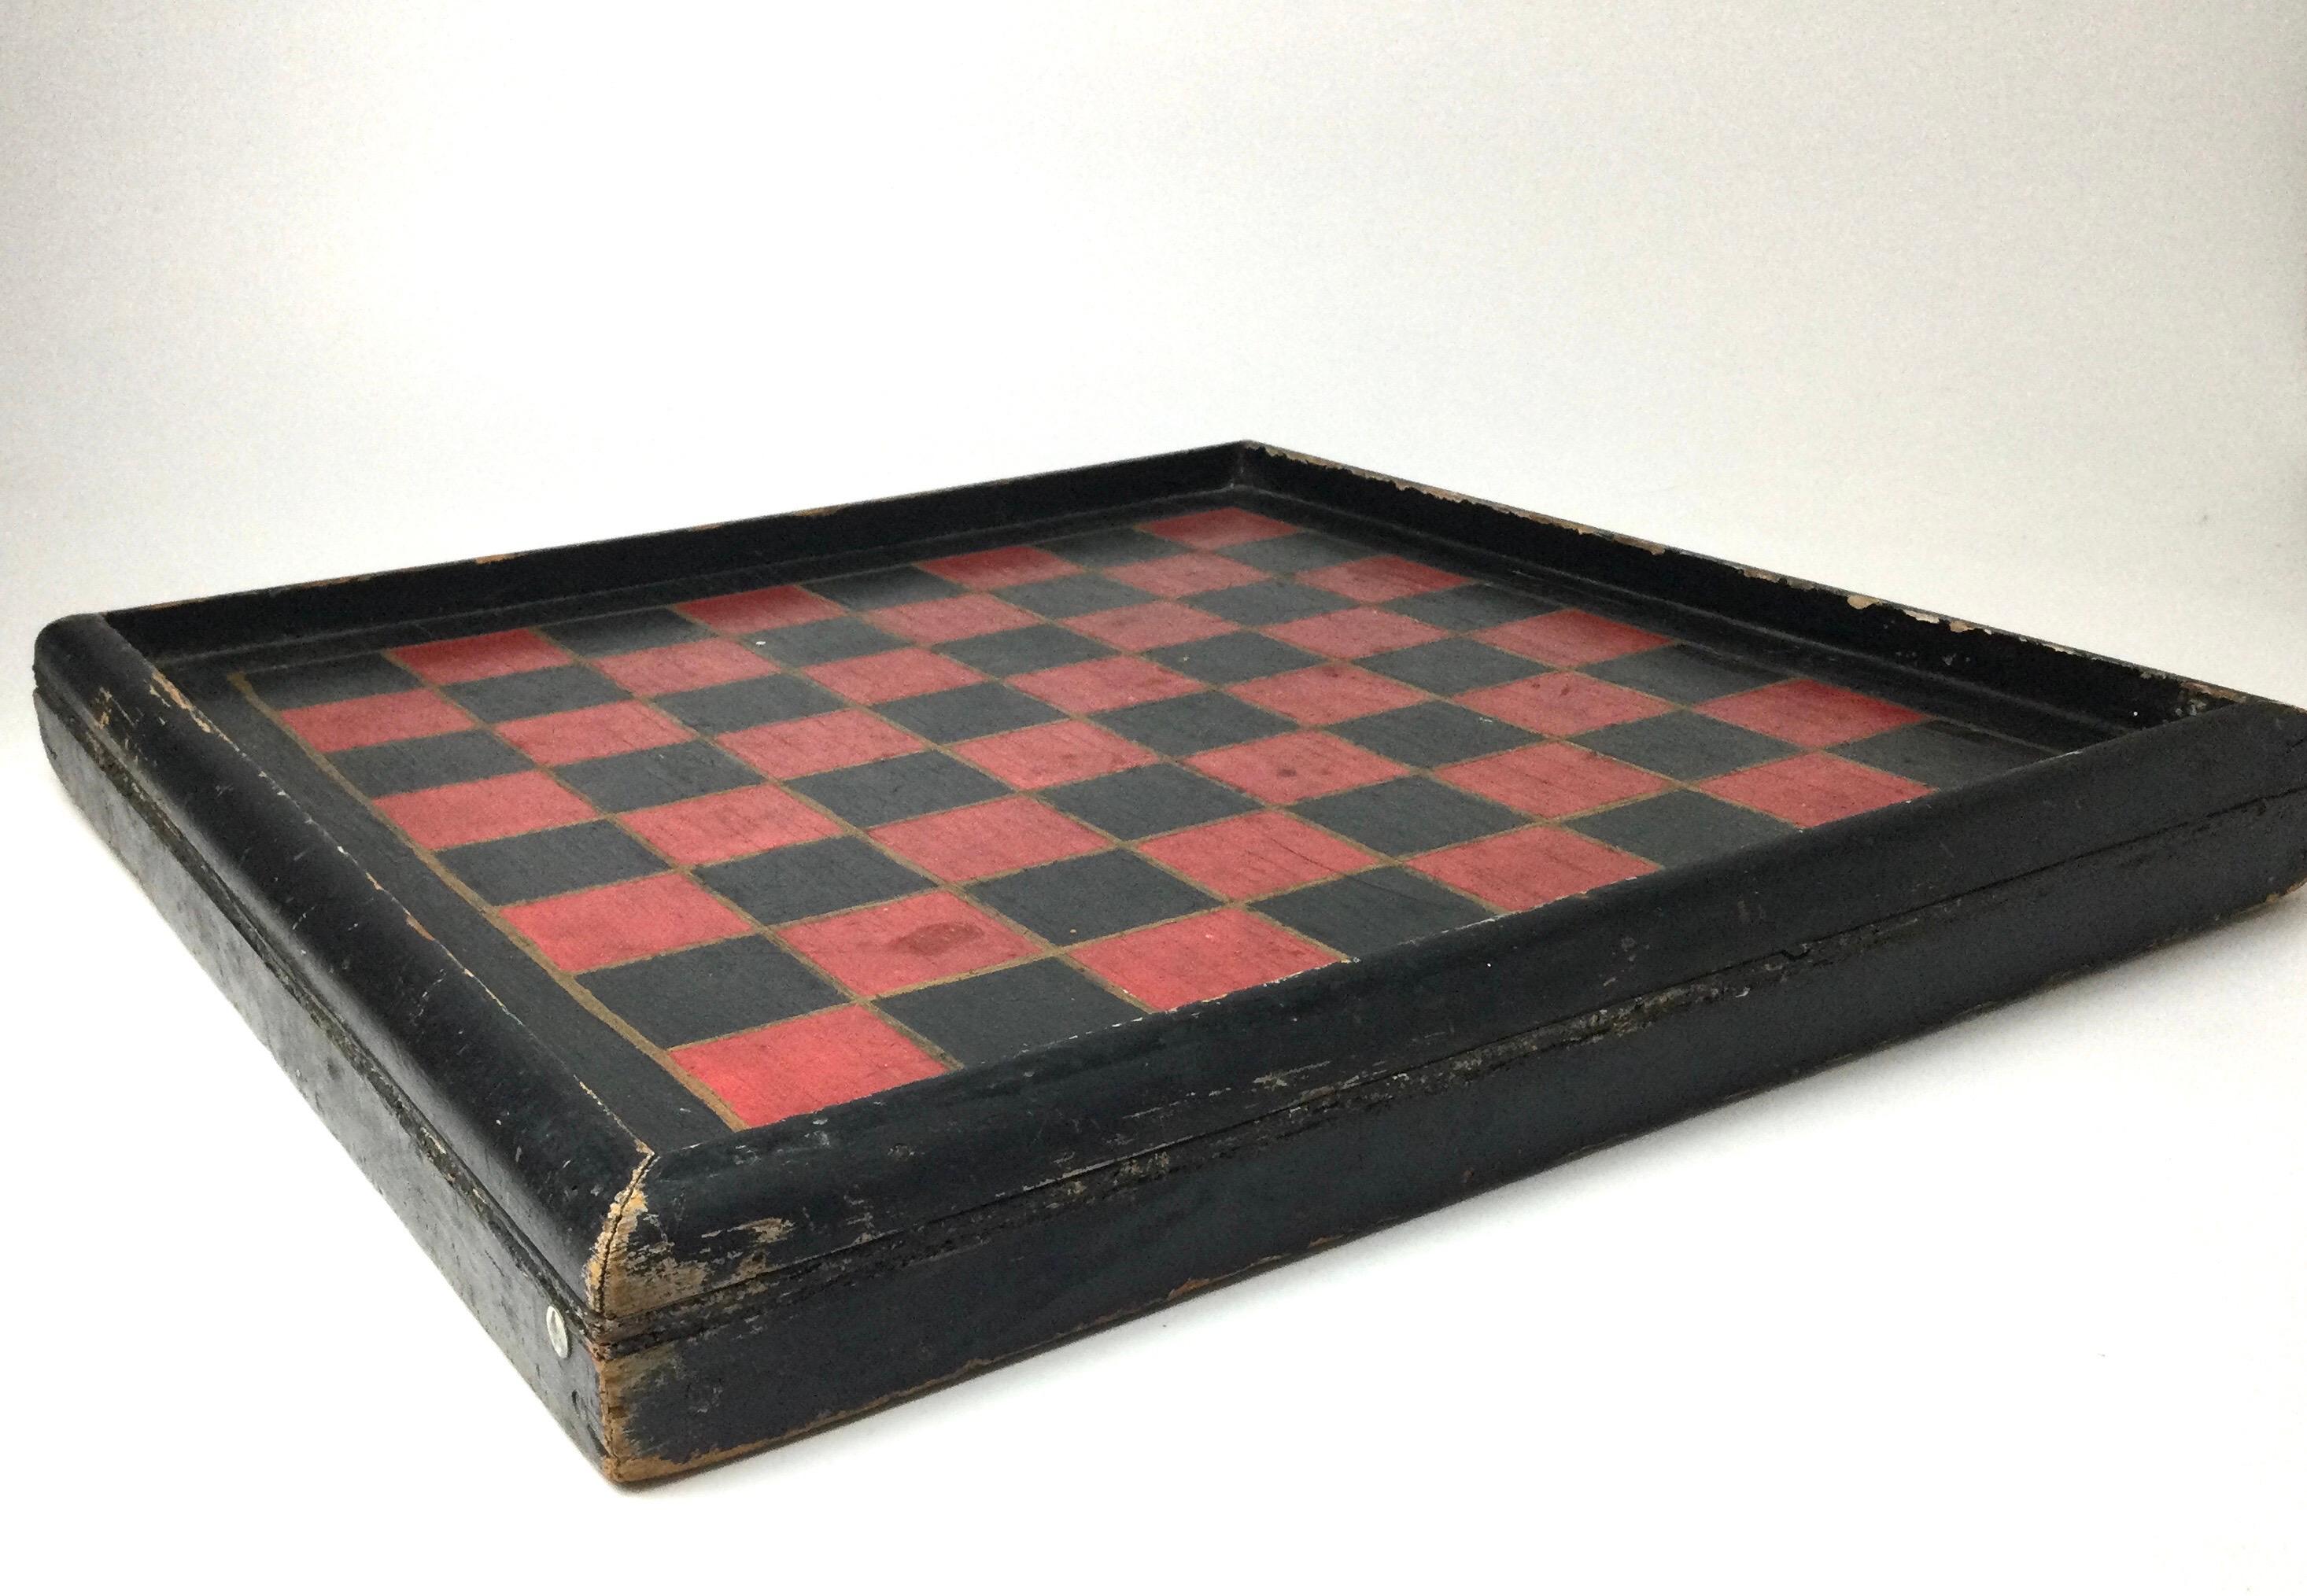 19th century game board in original painted red and black original surface. Hand painted red and black with gold lines between boxes. Nice old early condition with age appropriate wear to the paint. 20